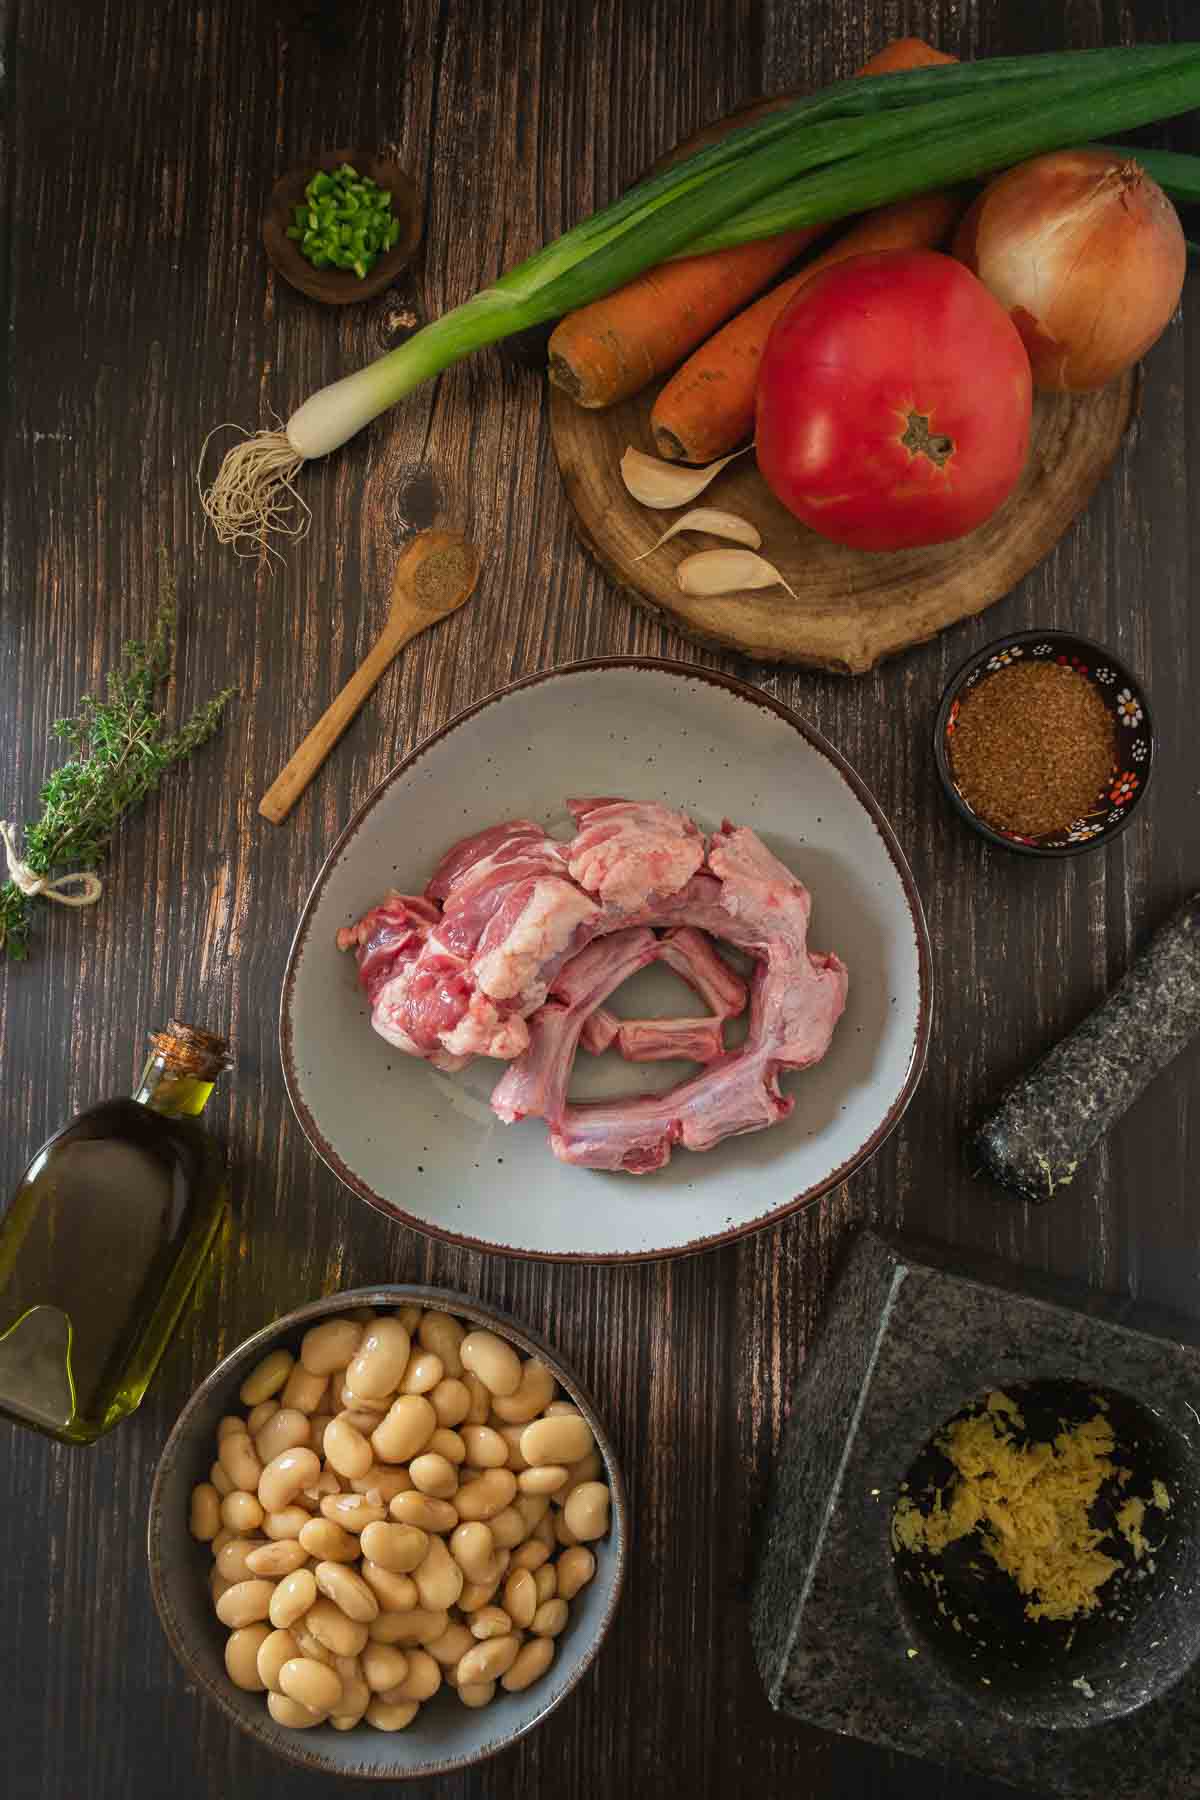 All of the ingredients needed to make an authentic and traditional Jamaican oxtail stew.